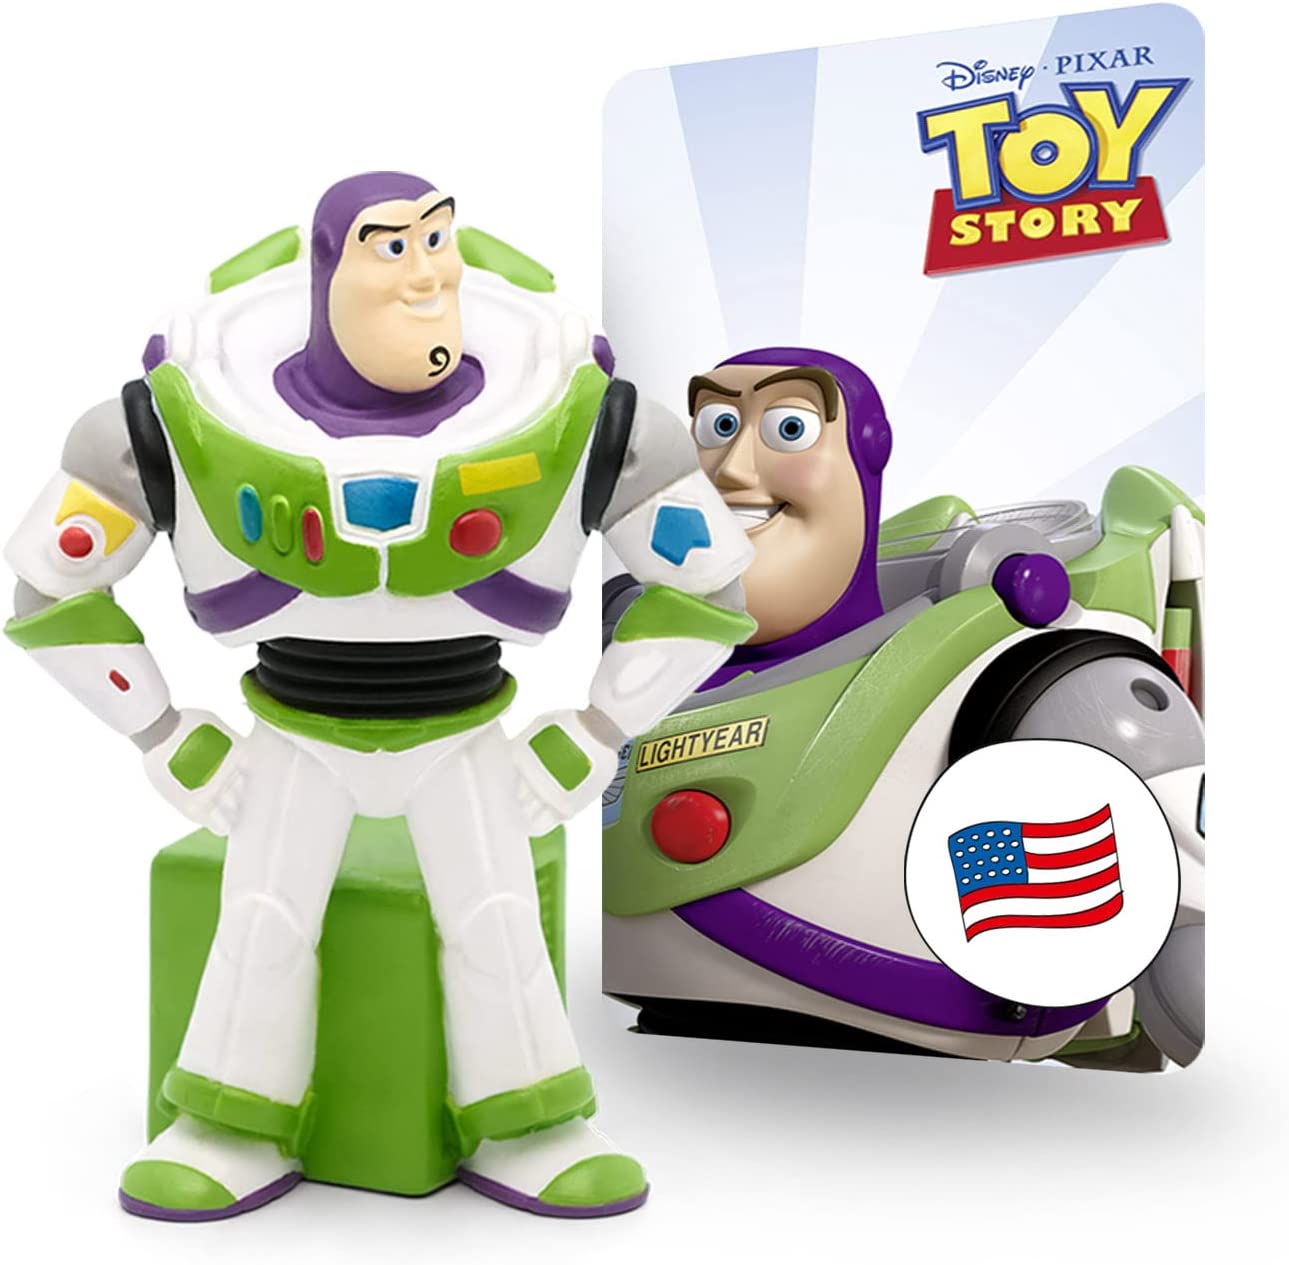 Tonies Disney Audio Play Character: Buzz Lightyear - Toy Story 2